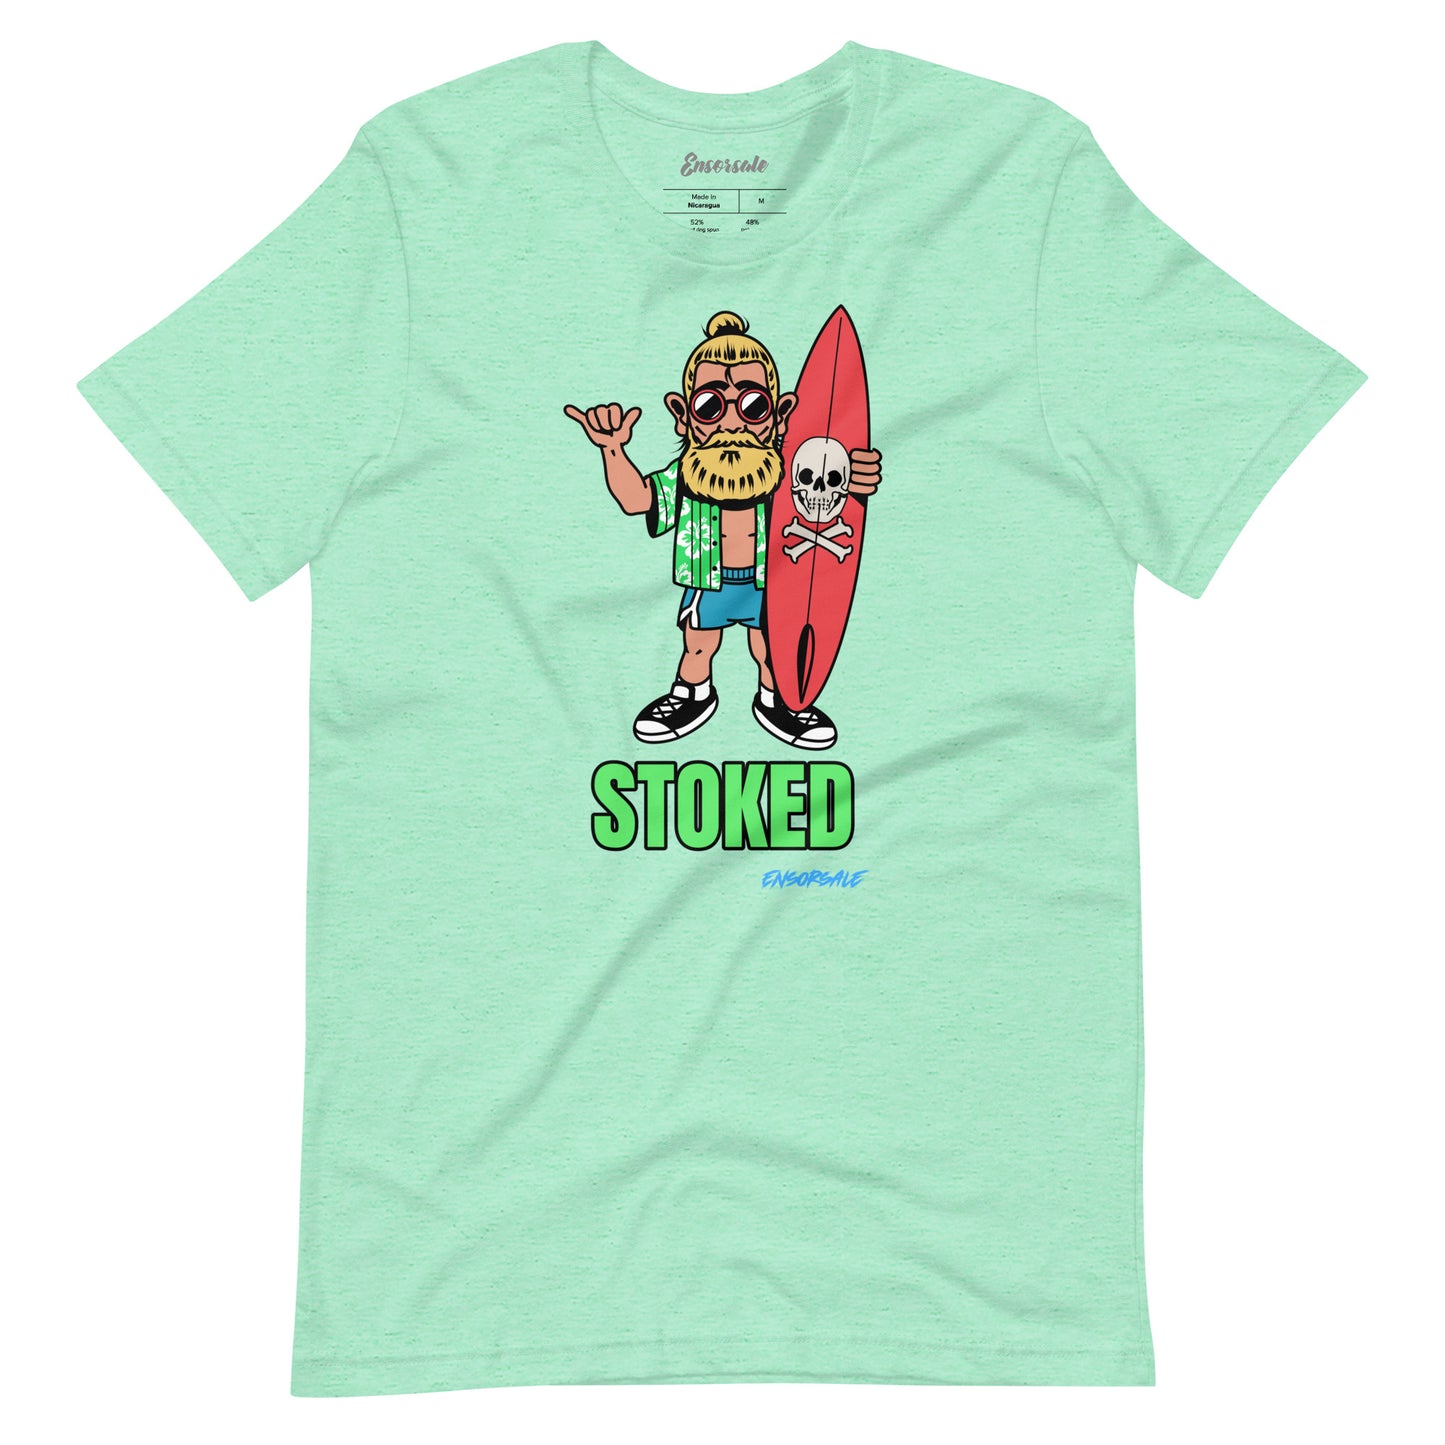 Stoked Ensorsale surfing T-Shirt